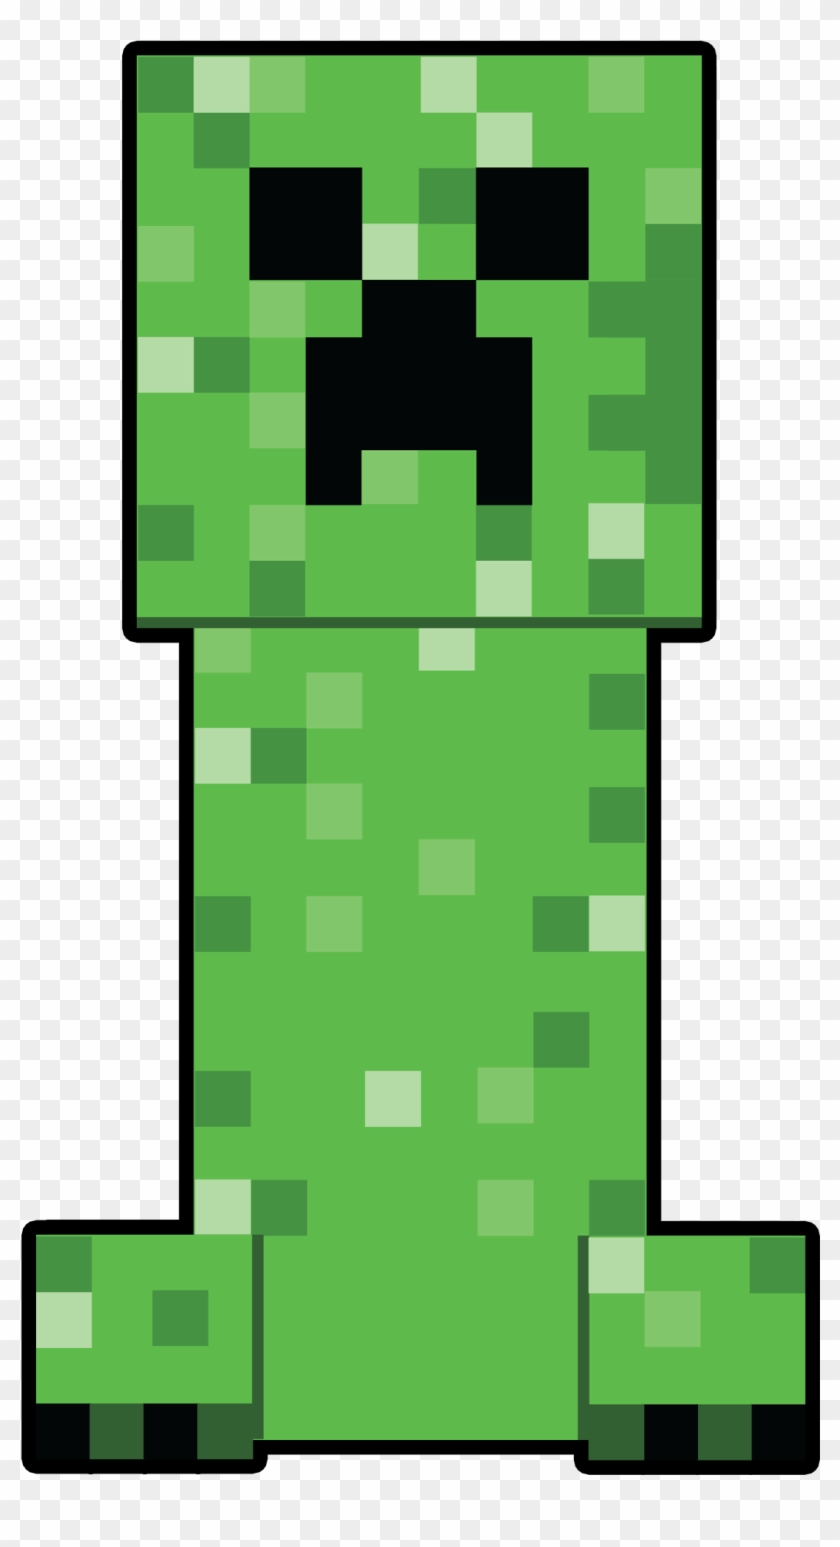 Download Minecraft Creeper By Cmorigins D5cnha4 1 024 1 871 Diary Of A Useless Creeper Free Transparent Png Clipart Images Download